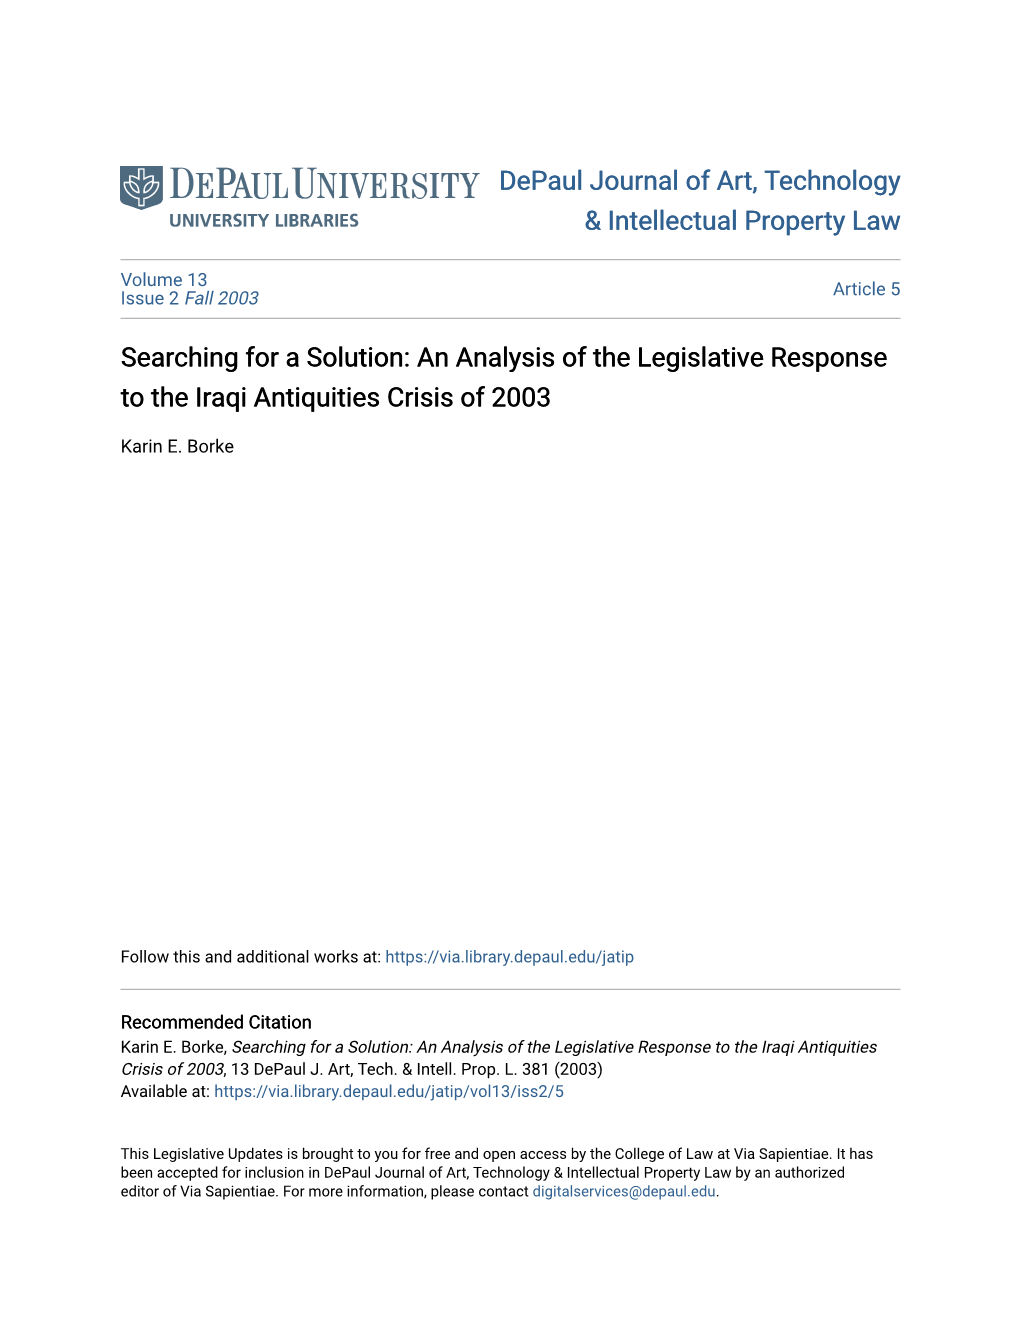 Searching for a Solution: an Analysis of the Legislative Response to the Iraqi Antiquities Crisis of 2003